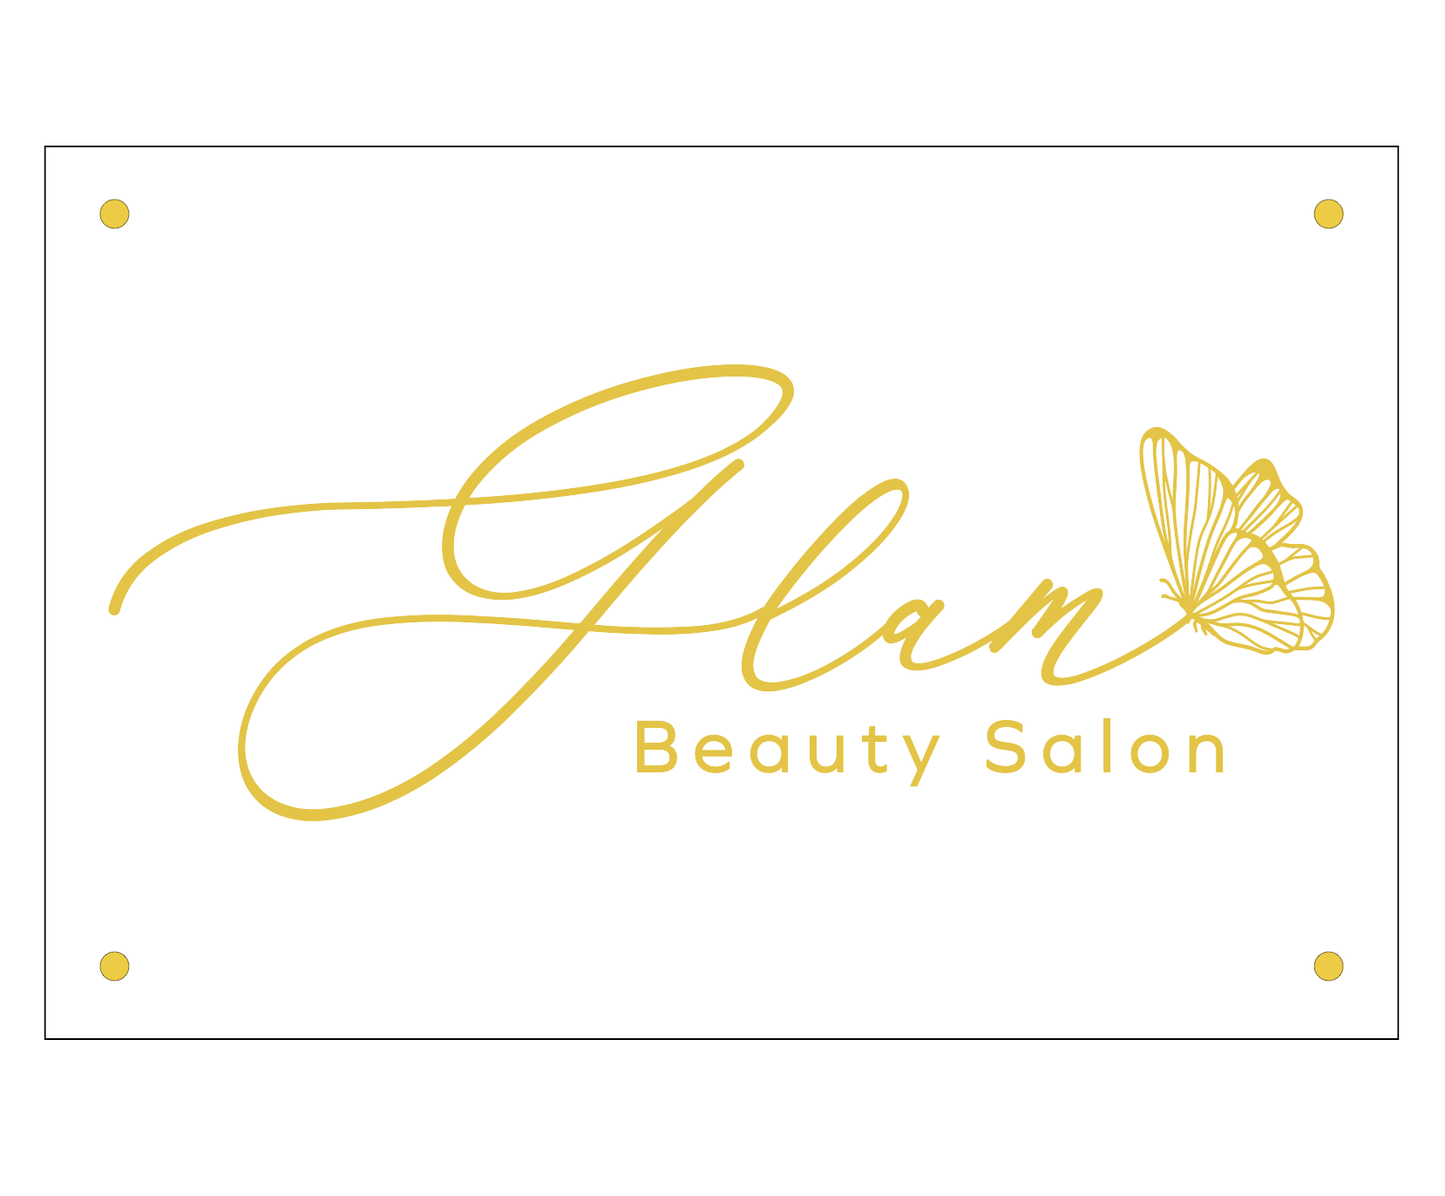 Custom Business Signage for Glam Beauty Salon Name Sign - VividEditions